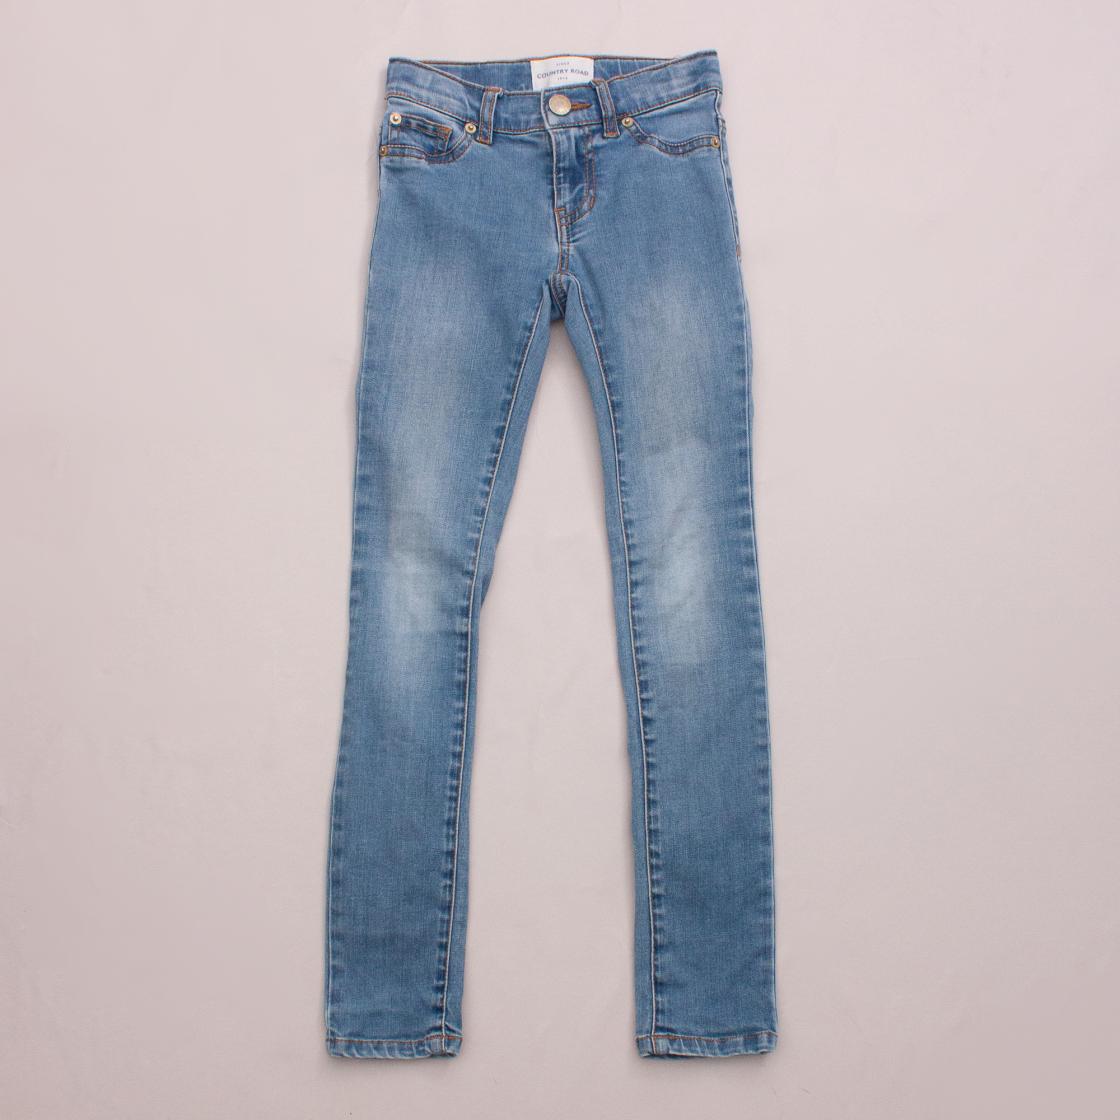 Country Road Skinny Jeans